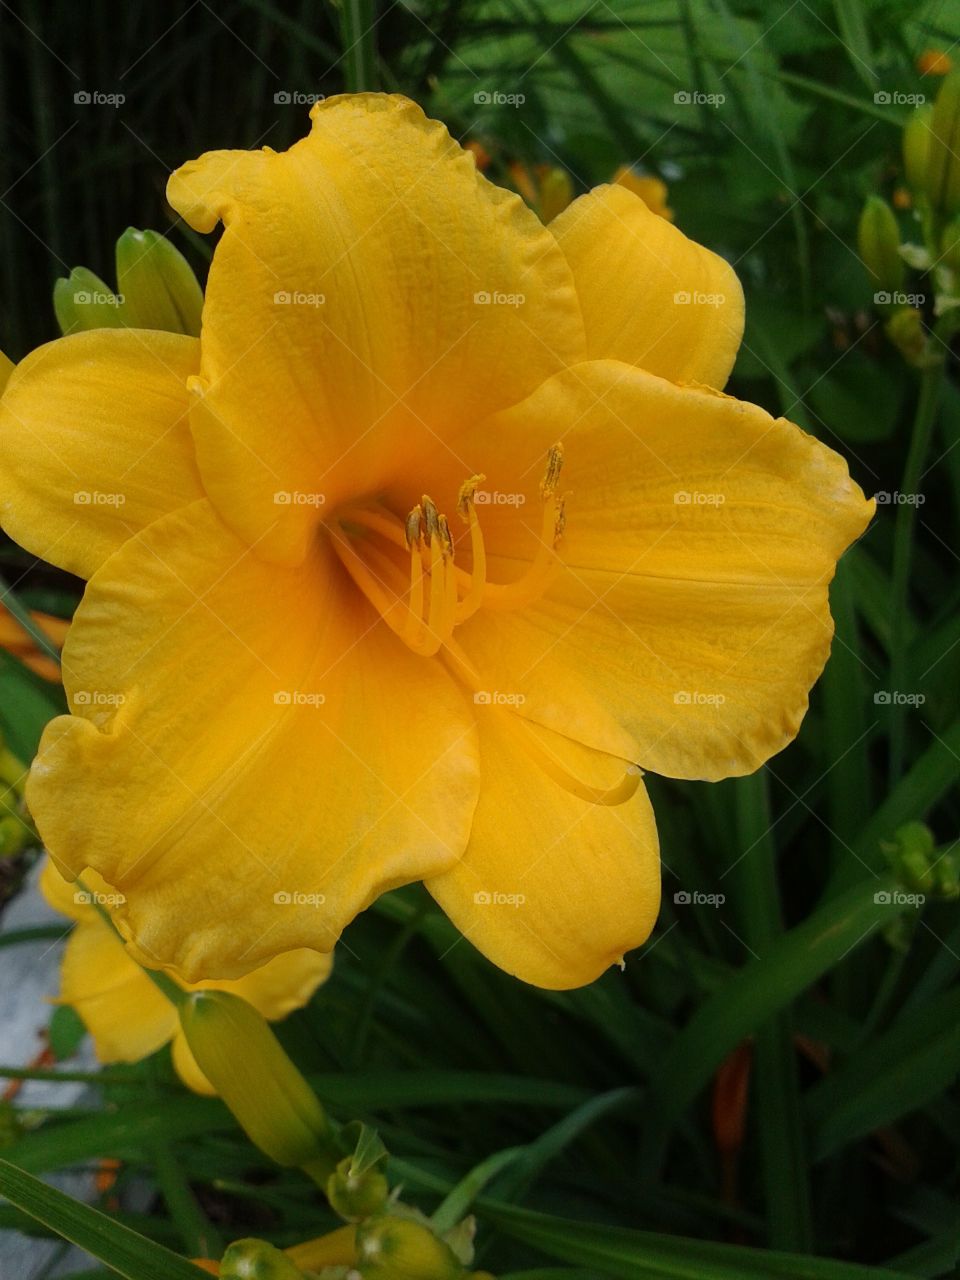 Lilly bloom. The bright yellow Day Lilly bloom wants attention.